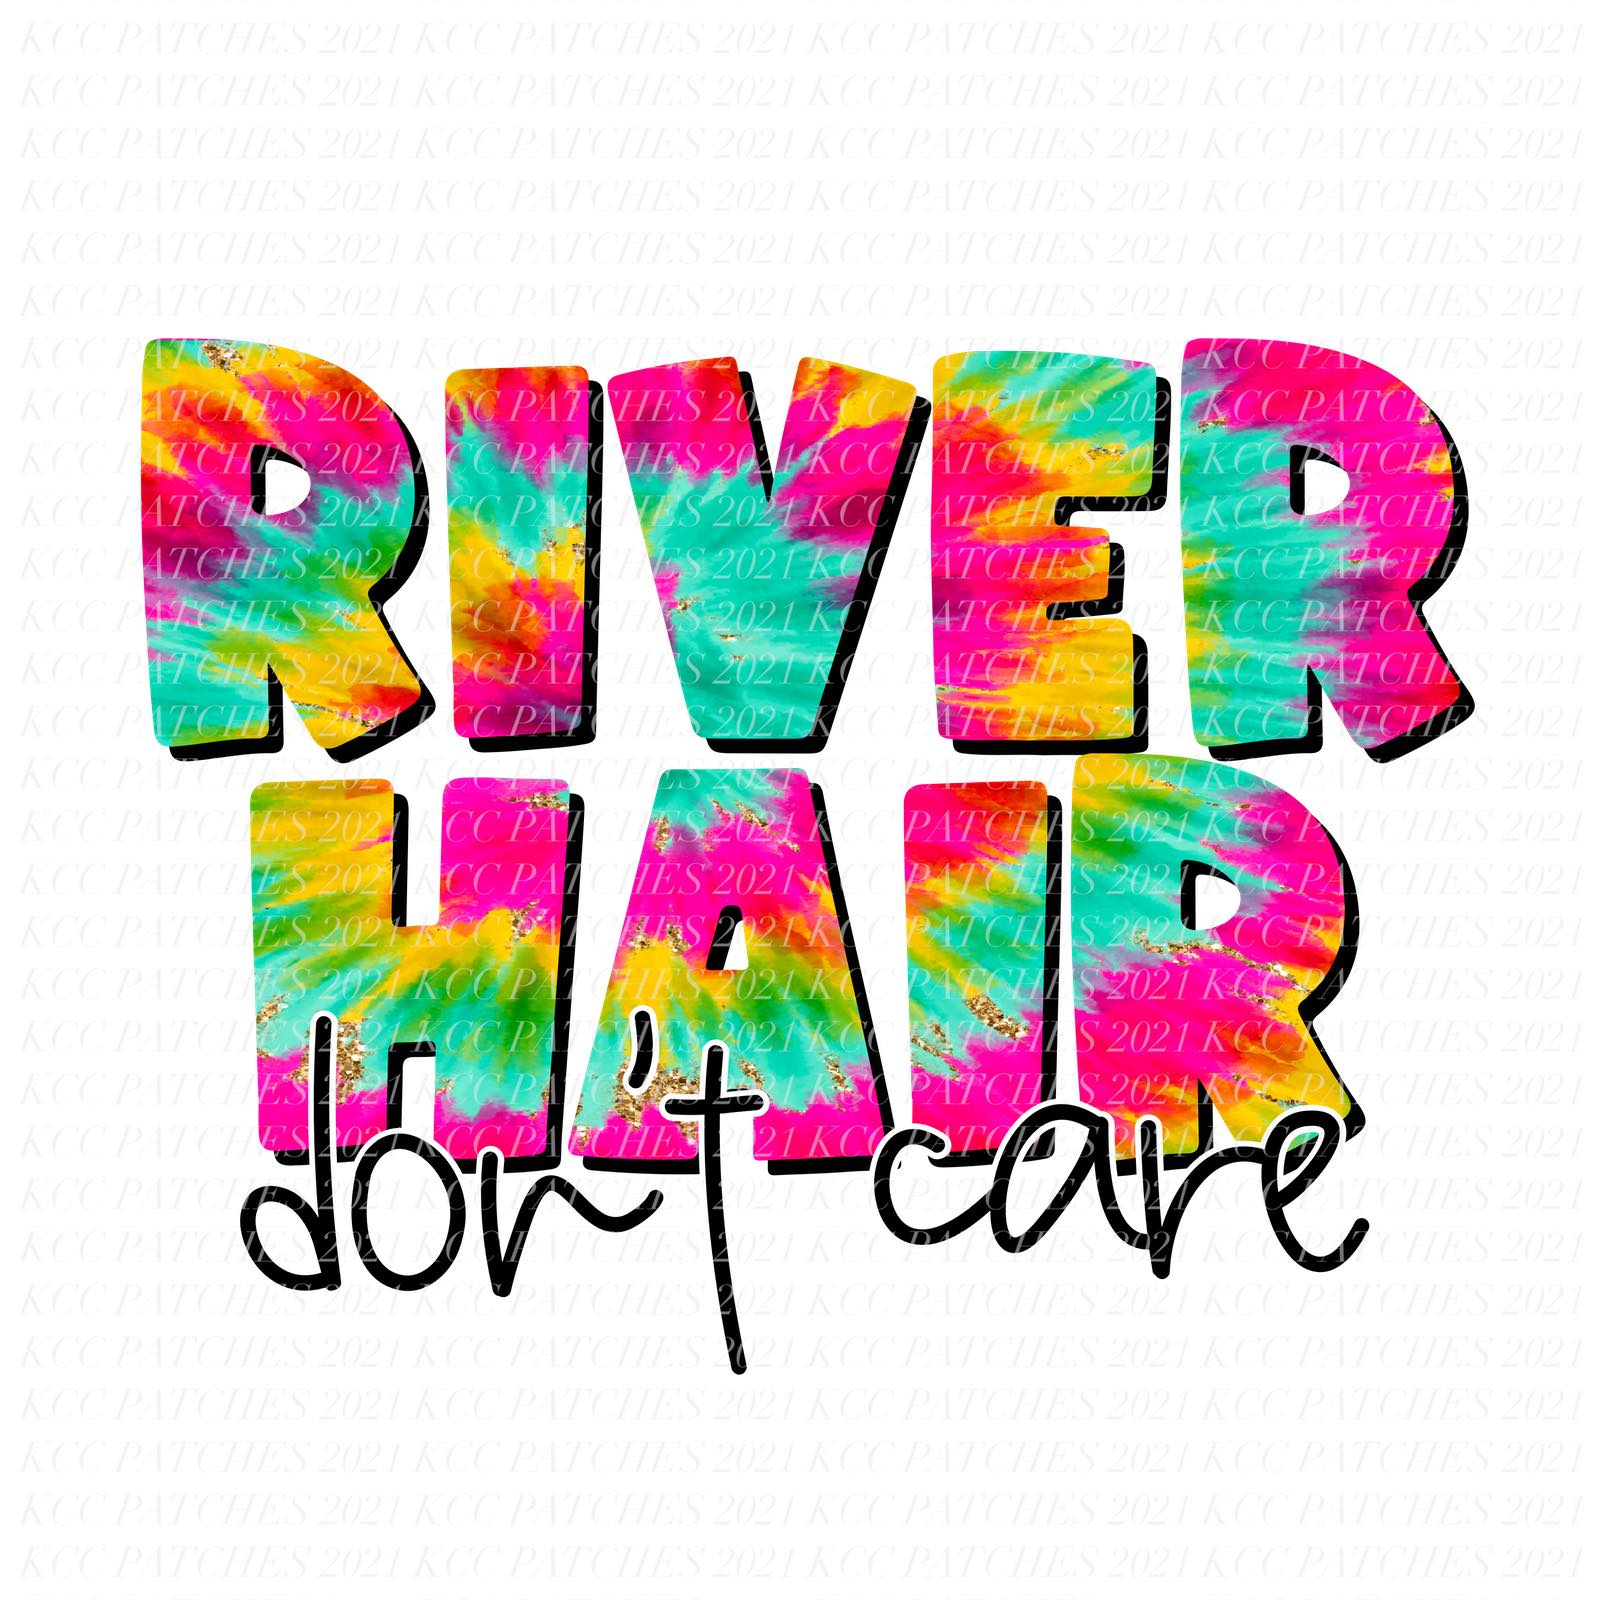 River Hair Don't Care